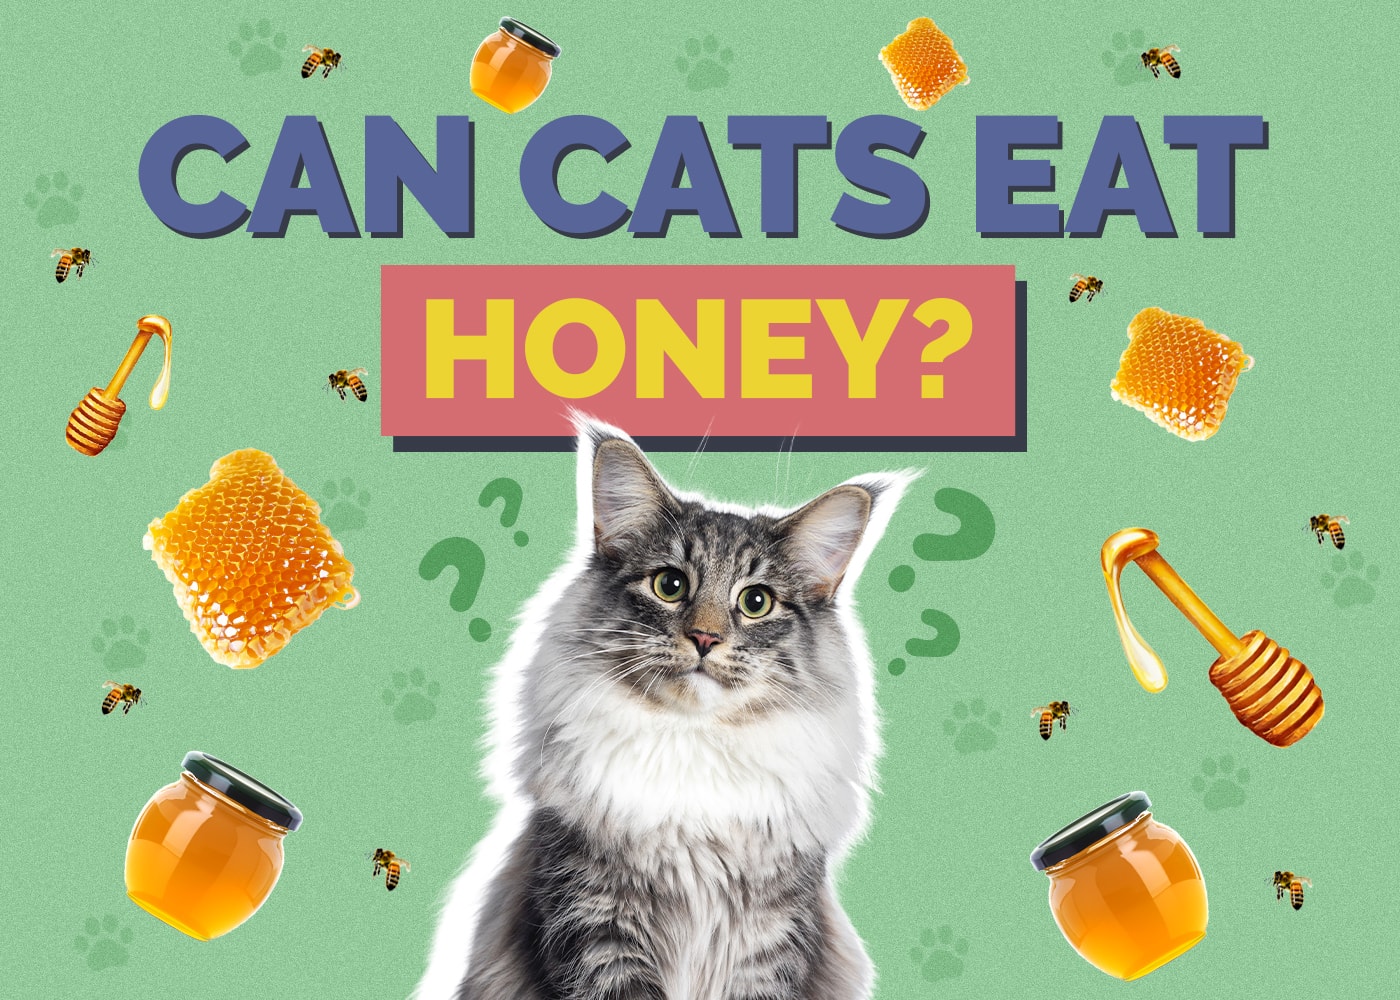 Can Cats Eat honey